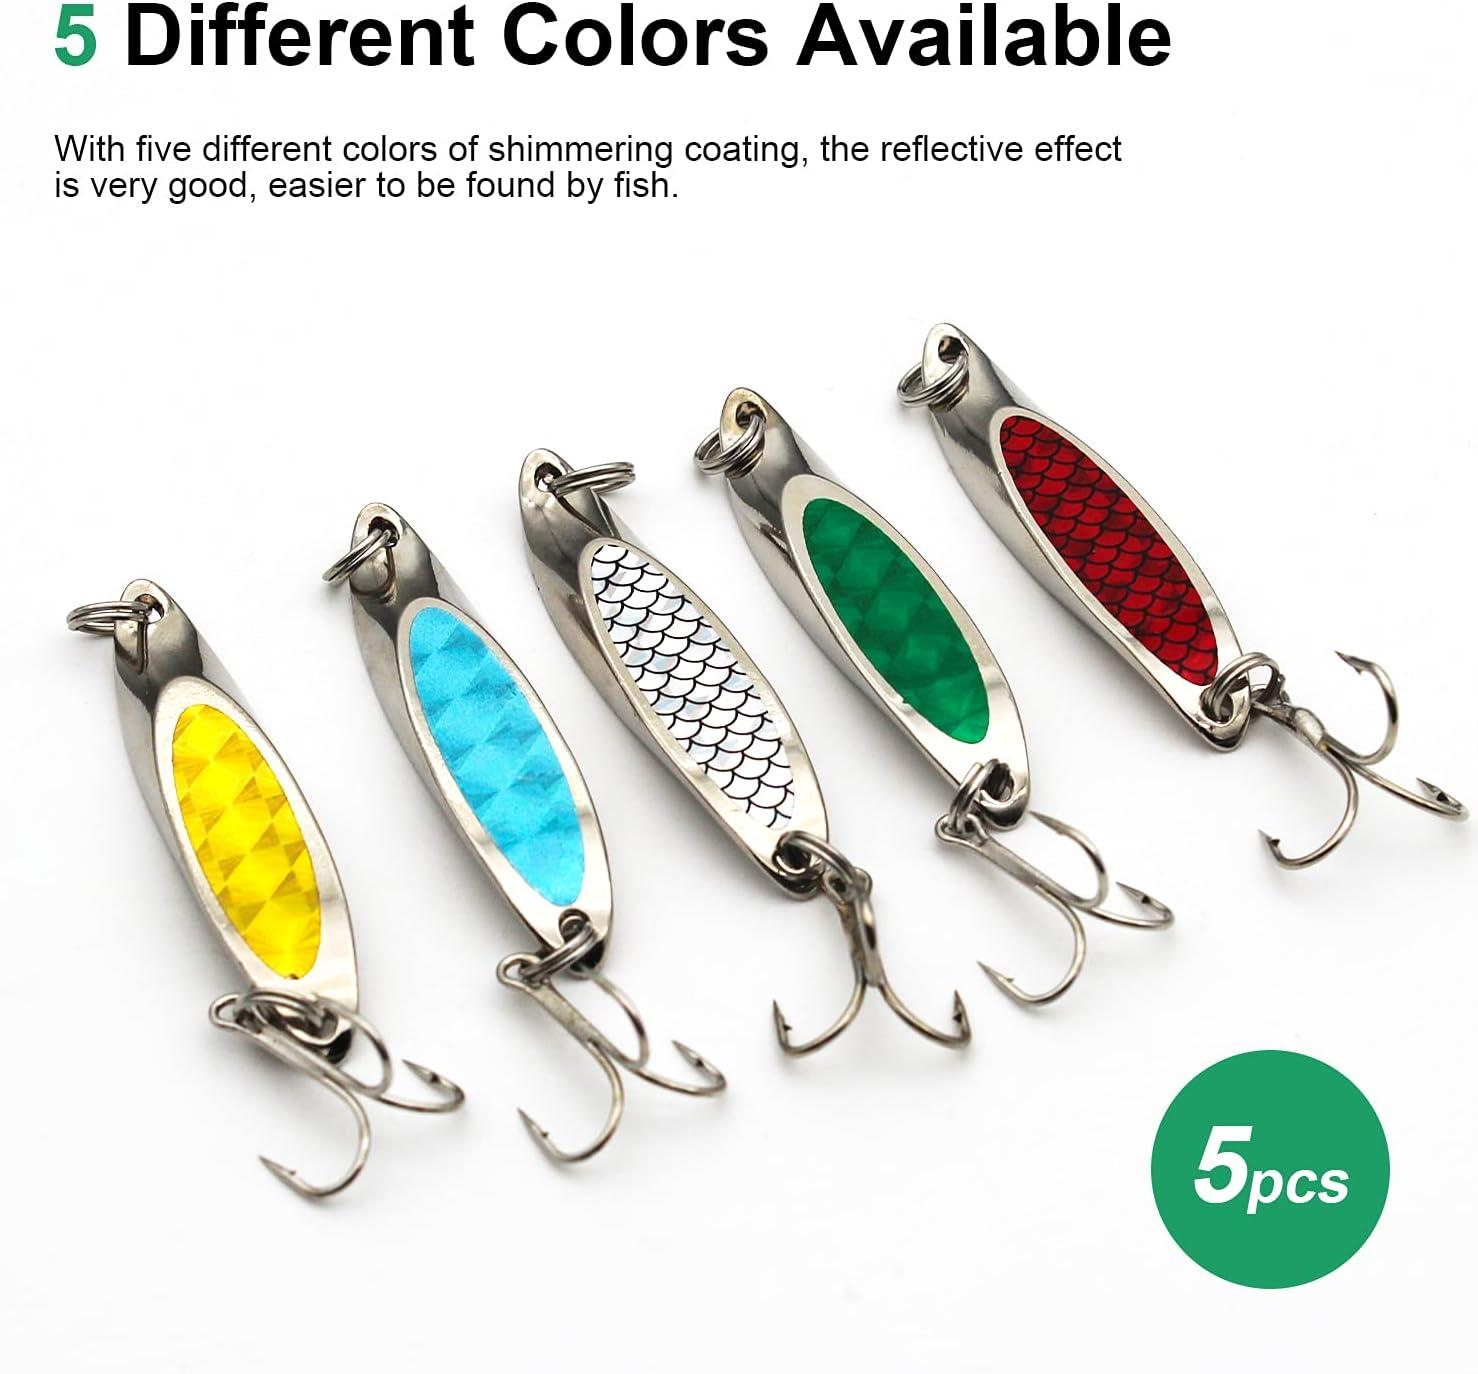 Trout Fishing Lures Hook,spoon Lures Spinner Trout Fishing,colorful Metal  Lures For Picked,mini Fishing Spinners Kit For Trout,hard Baits Single  Hooks